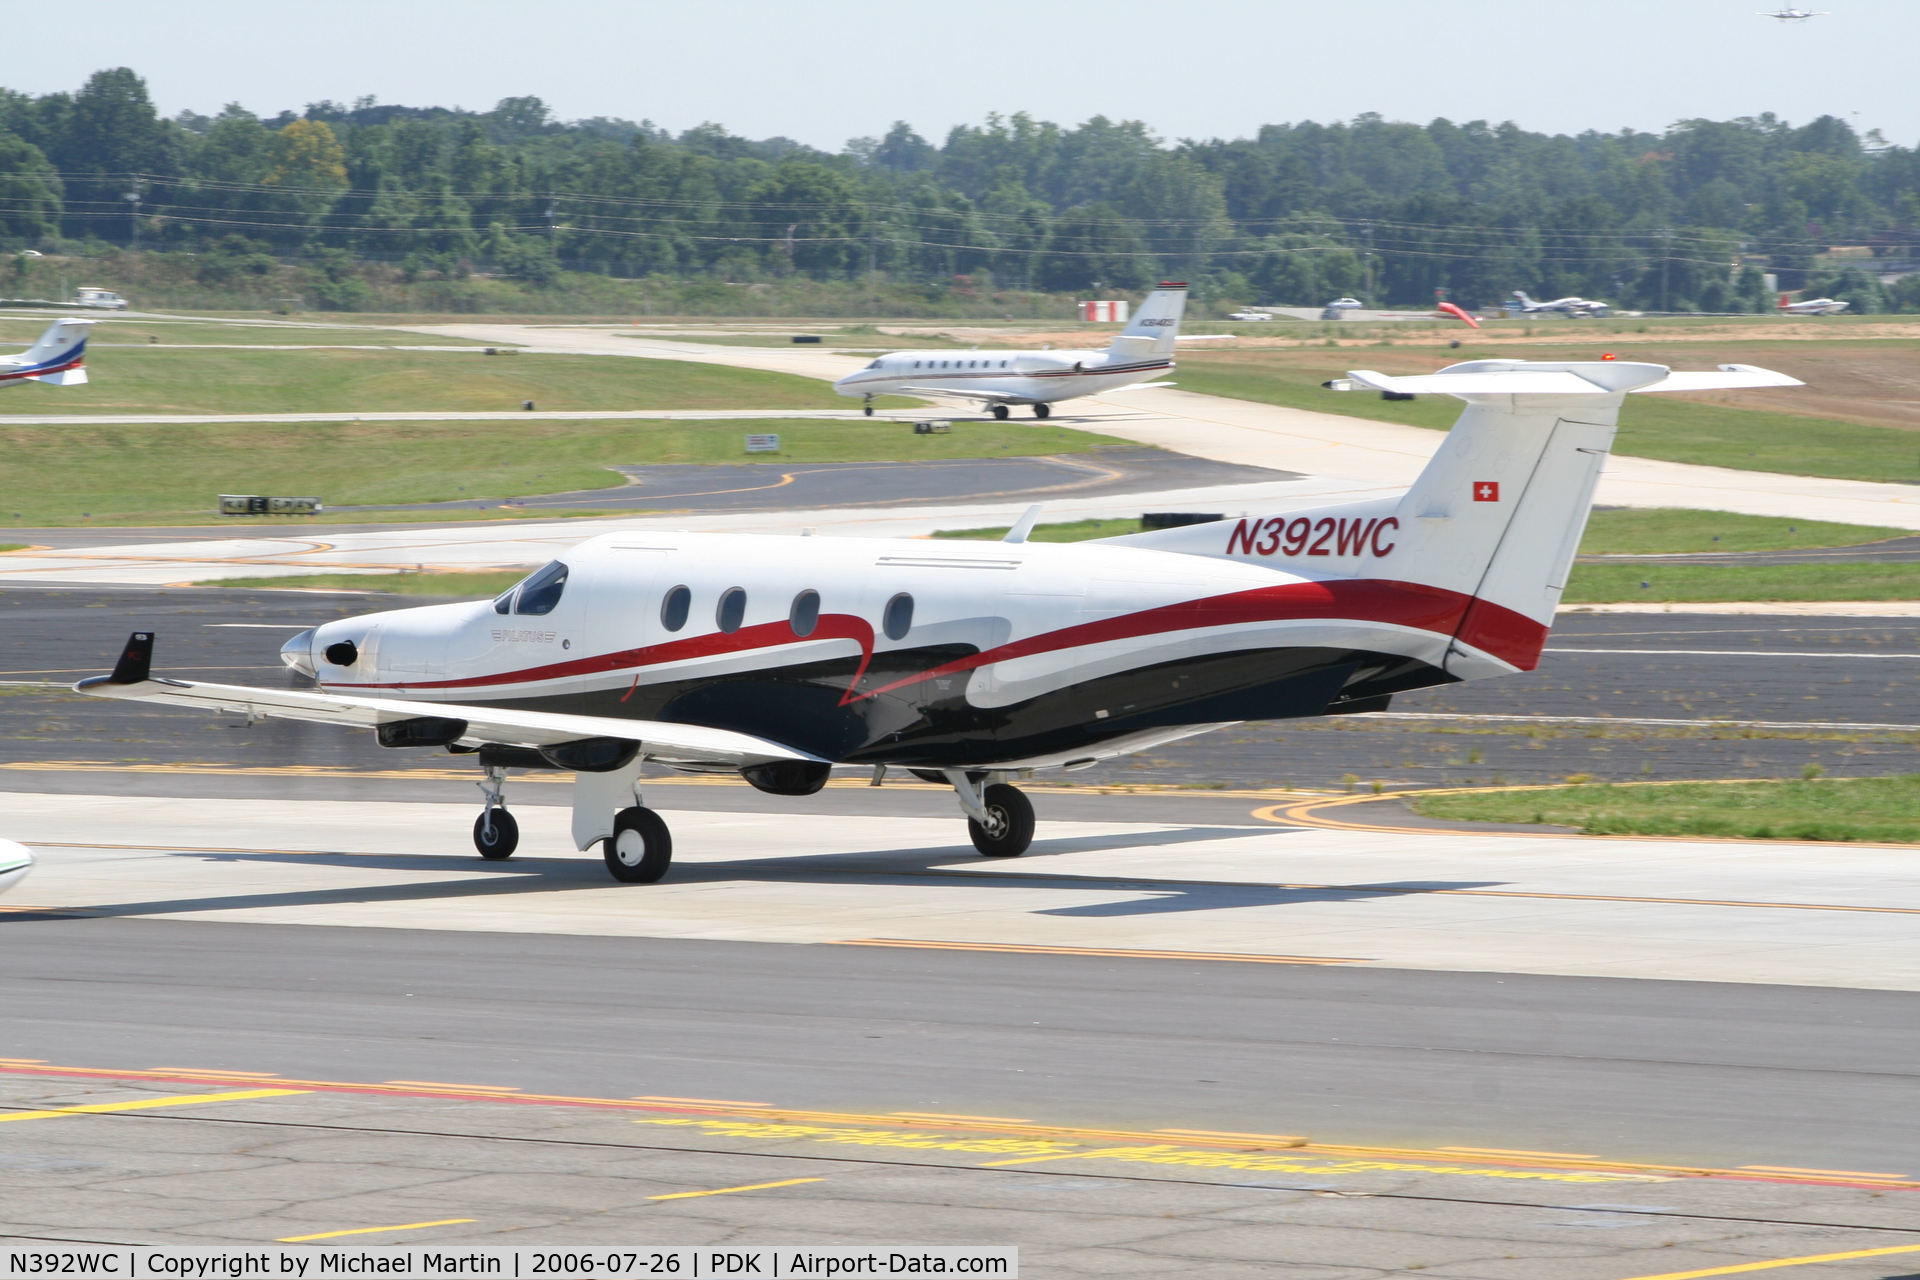 N392WC, 2000 Pilatus PC-12/45 C/N 392, Taxing to Epps Air Service